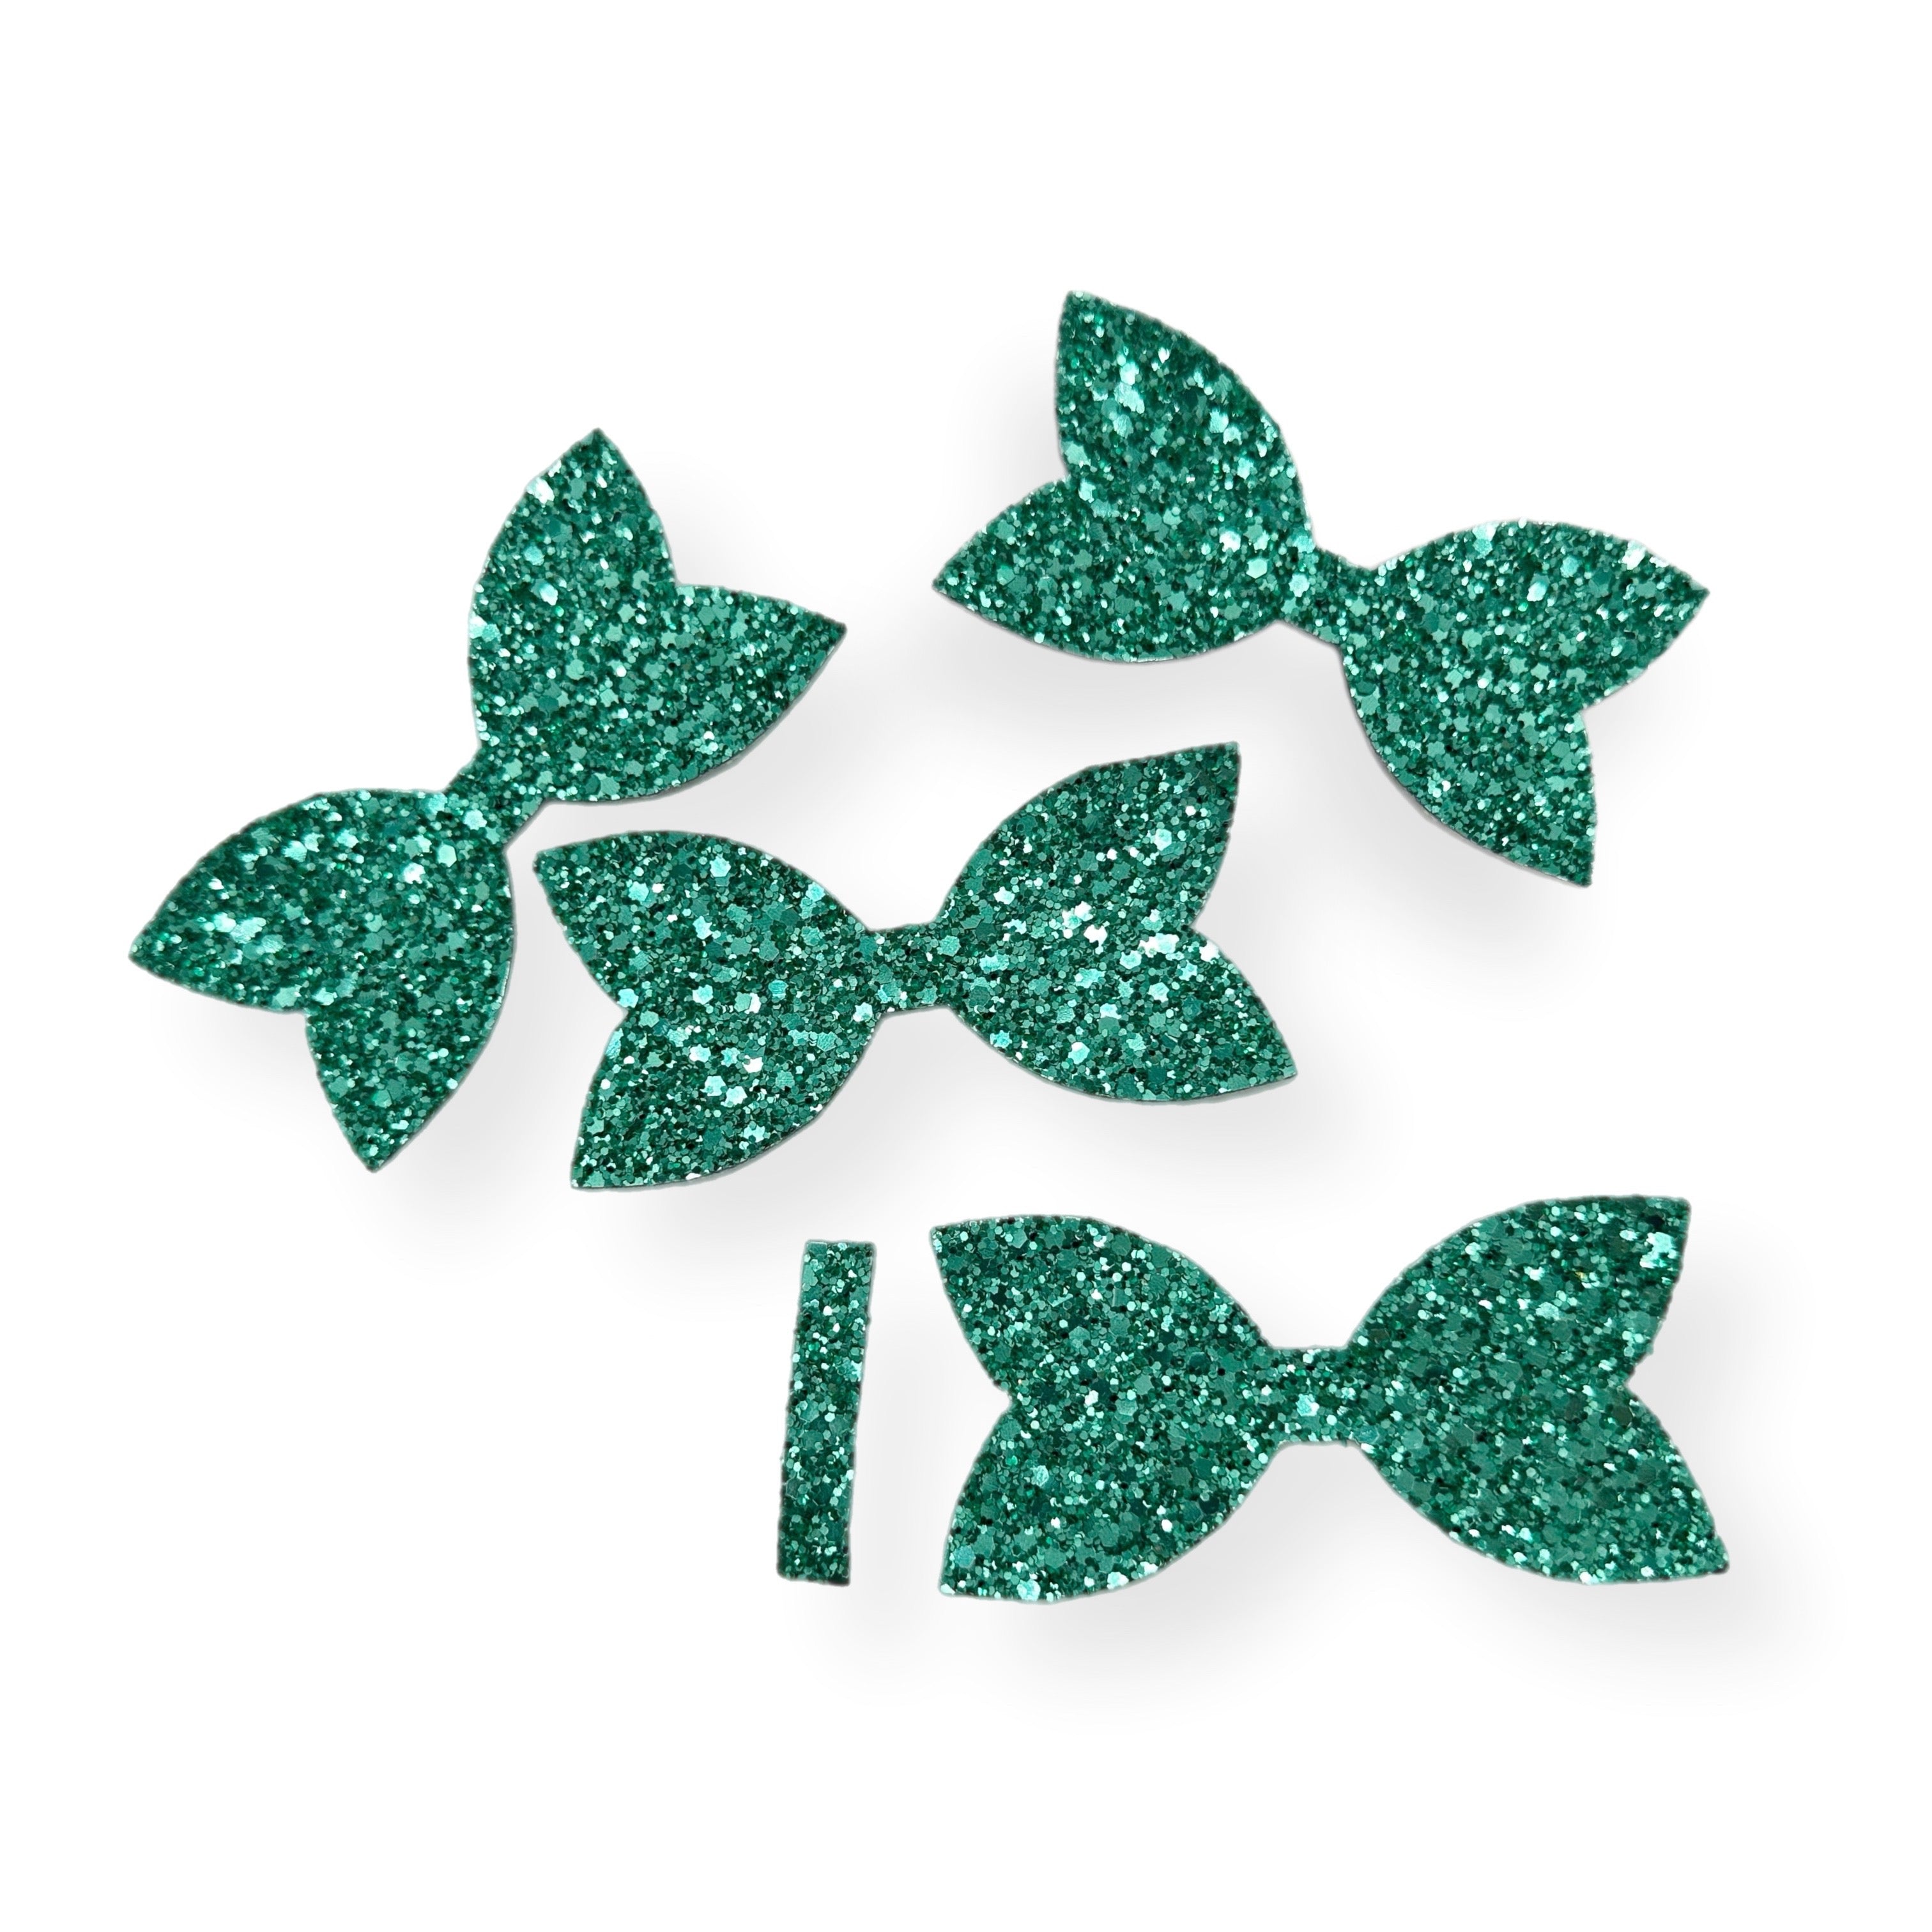 Jade Green Pre Cut Chunky Glitter Bow Tails & Centres 3.5”- 4 Pack